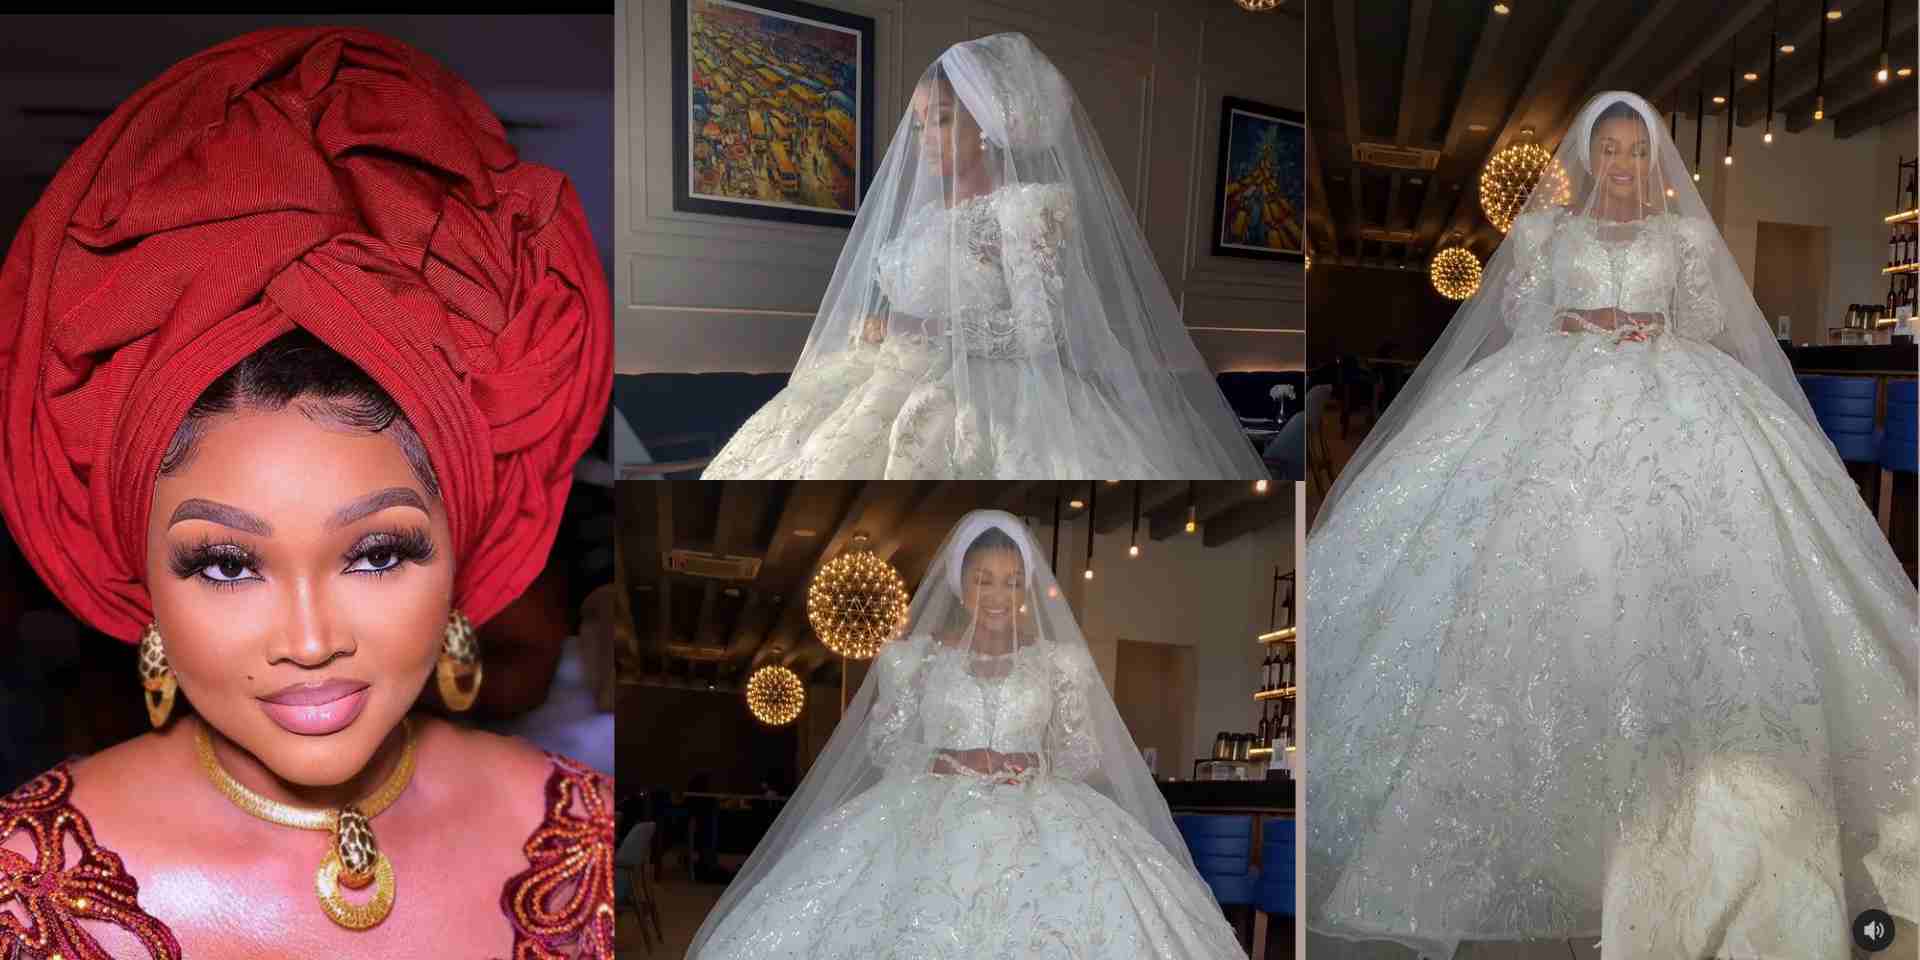 "She wants to trend again" - Reactions as Mercy Aigbe shares throwback video from her White wedding